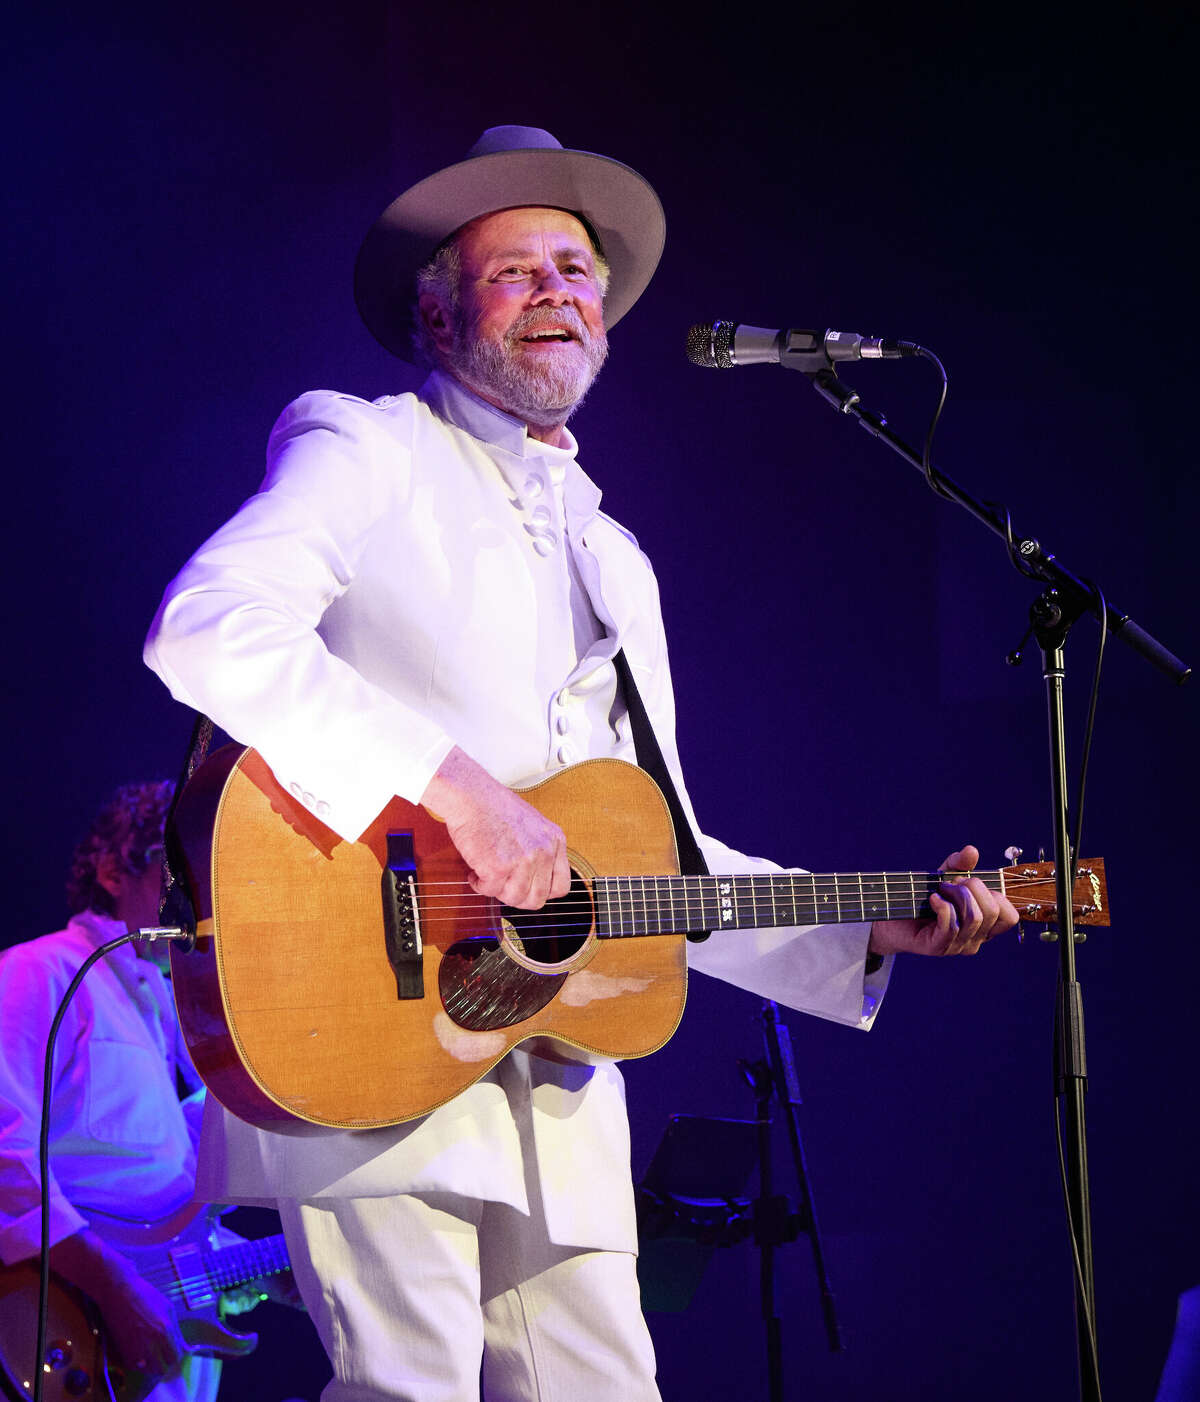 NASHVILLE, TENNESSEE - FEBRUARY 18: Singer & songwriter Robert Earl Keen performs at the Ryman Auditorium on February 18, 2022 in Nashville, Tennessee. (Photo by Jason Kempin/Getty Images)